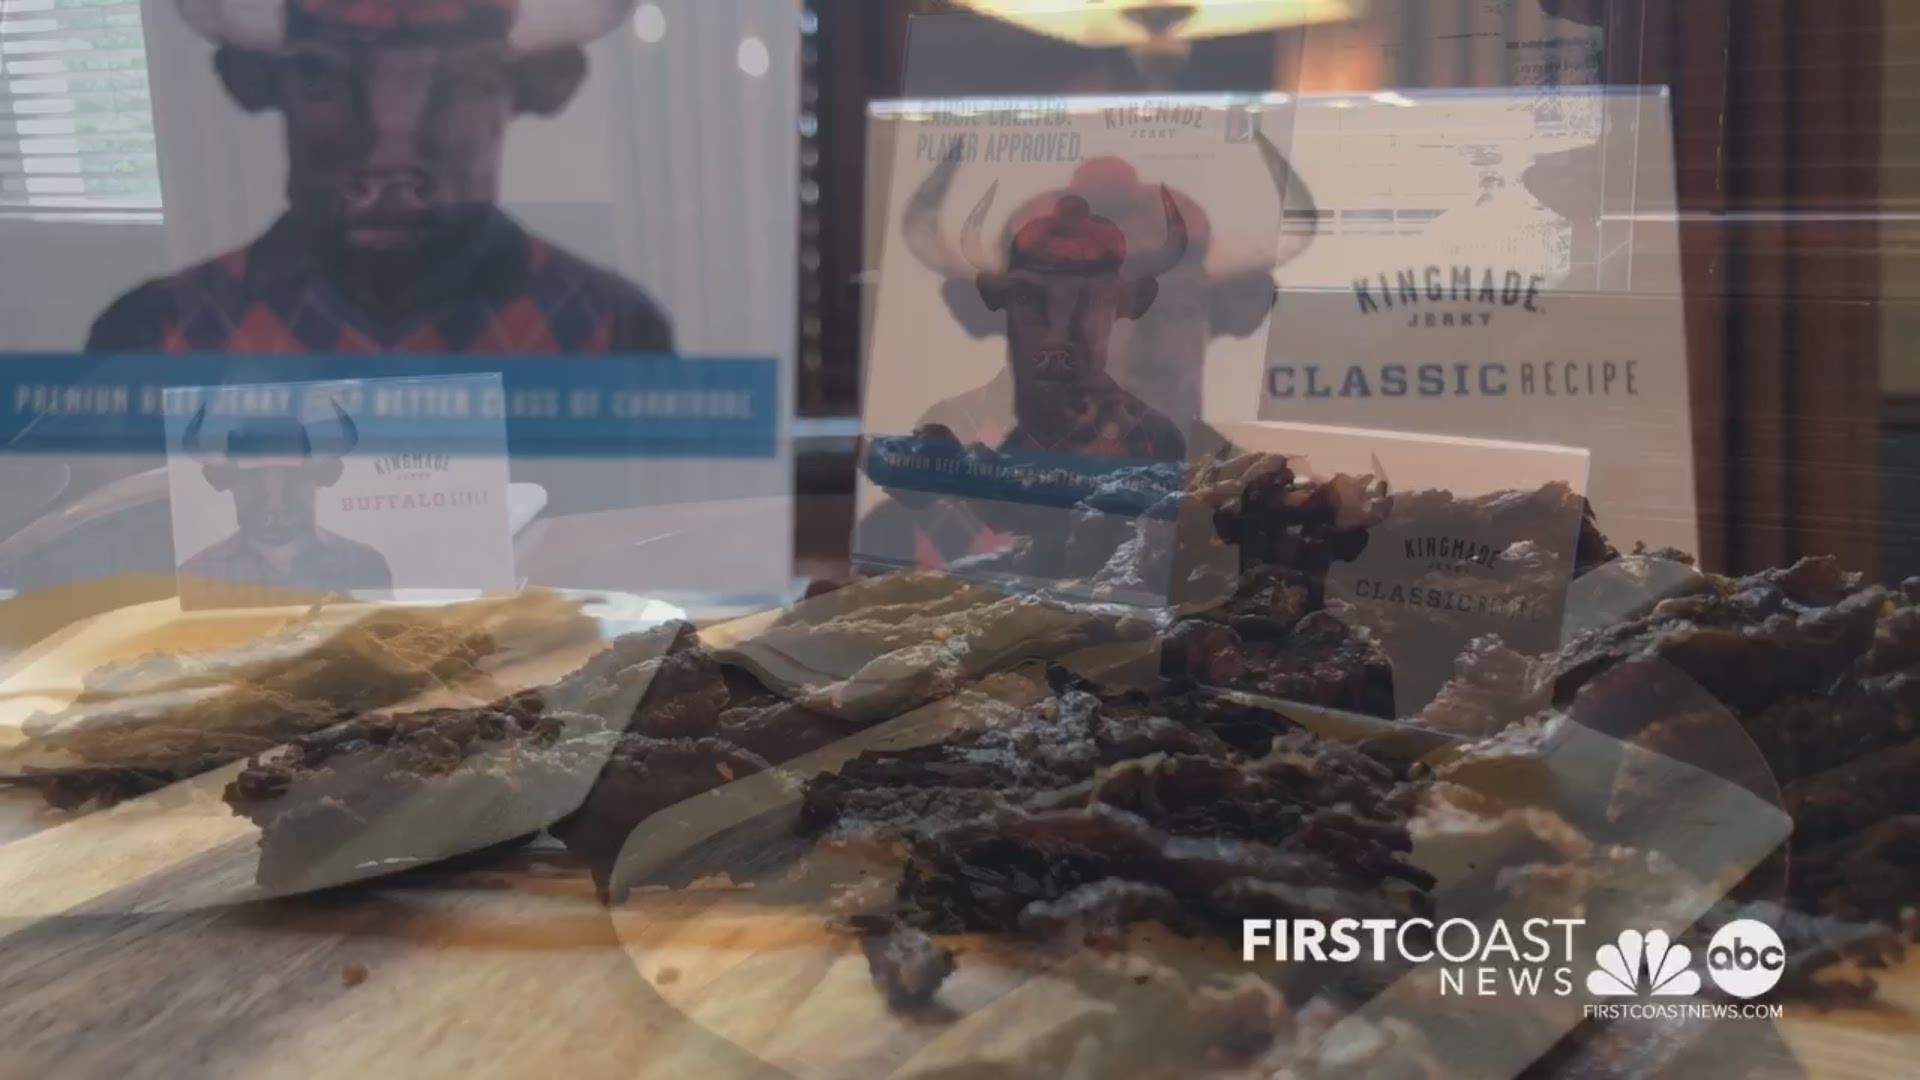 The PGA TOUR and Kingmade Jerky announced a new, multi-year marketing relationship making the beef jerky the "Official Jerky and Official Meat Snack of the PGA TOUR."